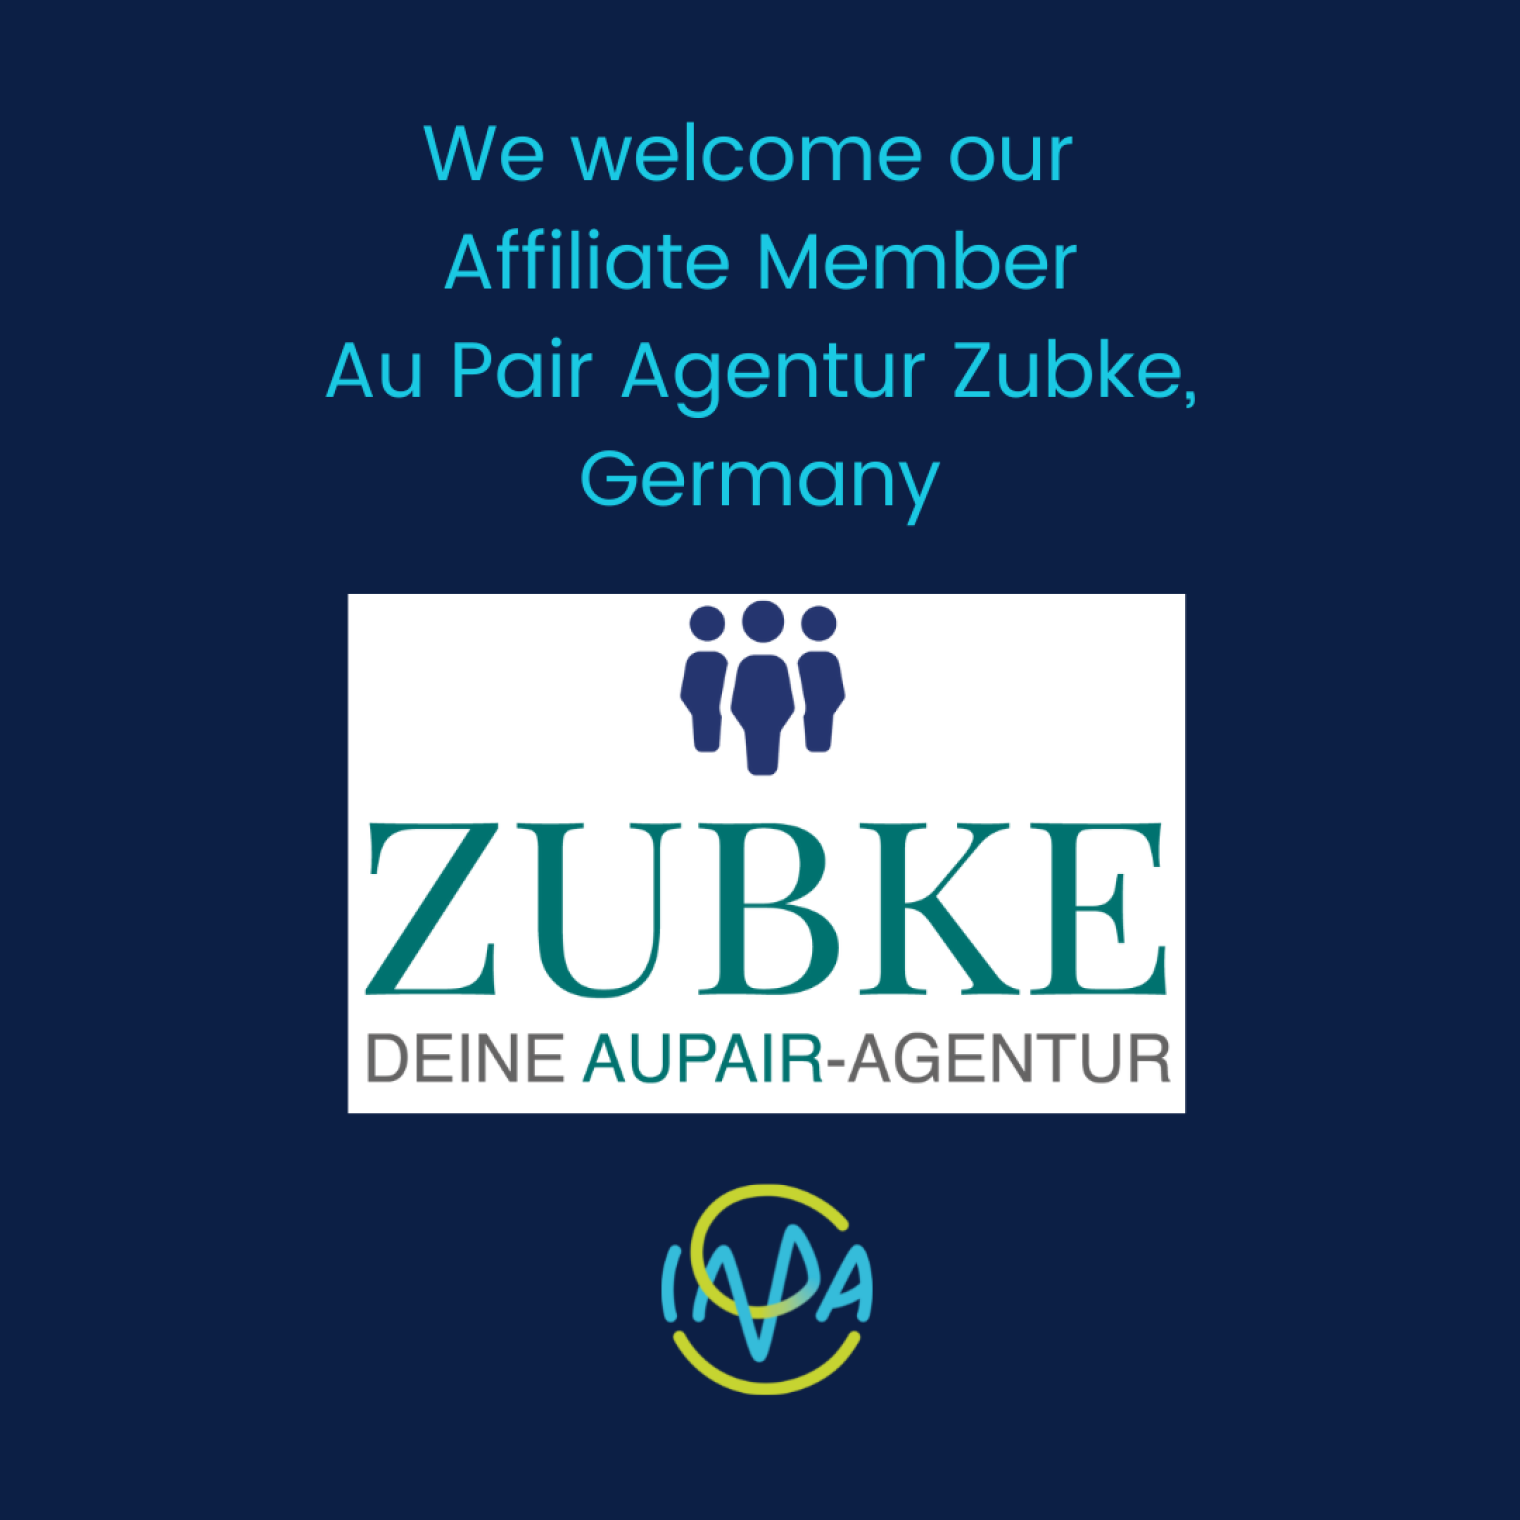 Welcome new Affiliate Member Au Pair Agentur Zubke, Germany